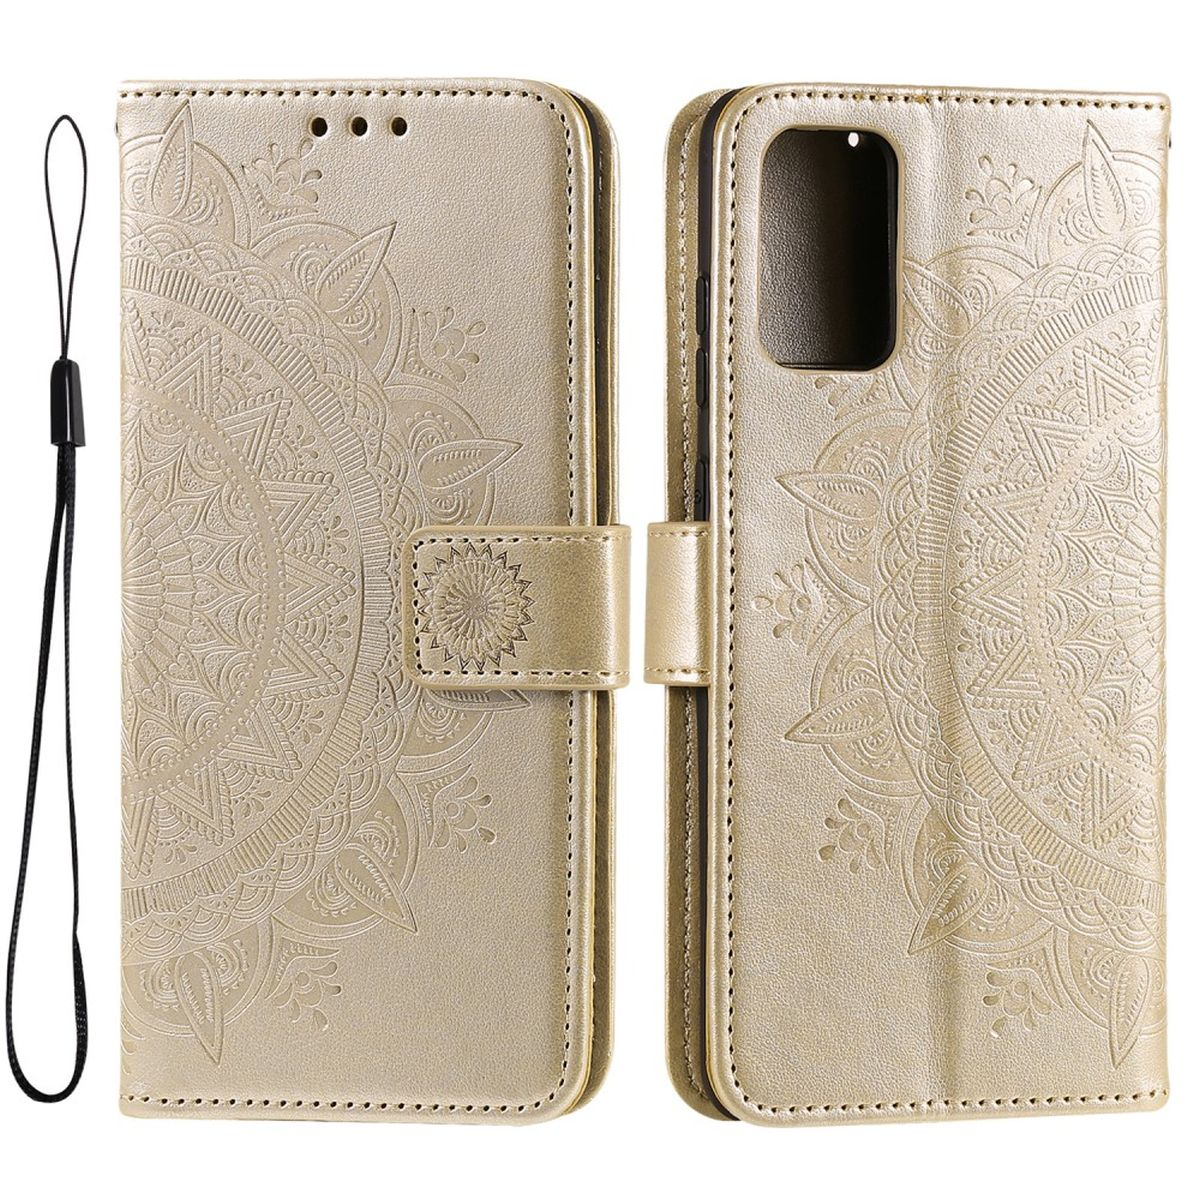 A53 5G, mit COVERKINGZ Galaxy Bookcover, Samsung, Mandala Muster, Klapphülle Rosegold